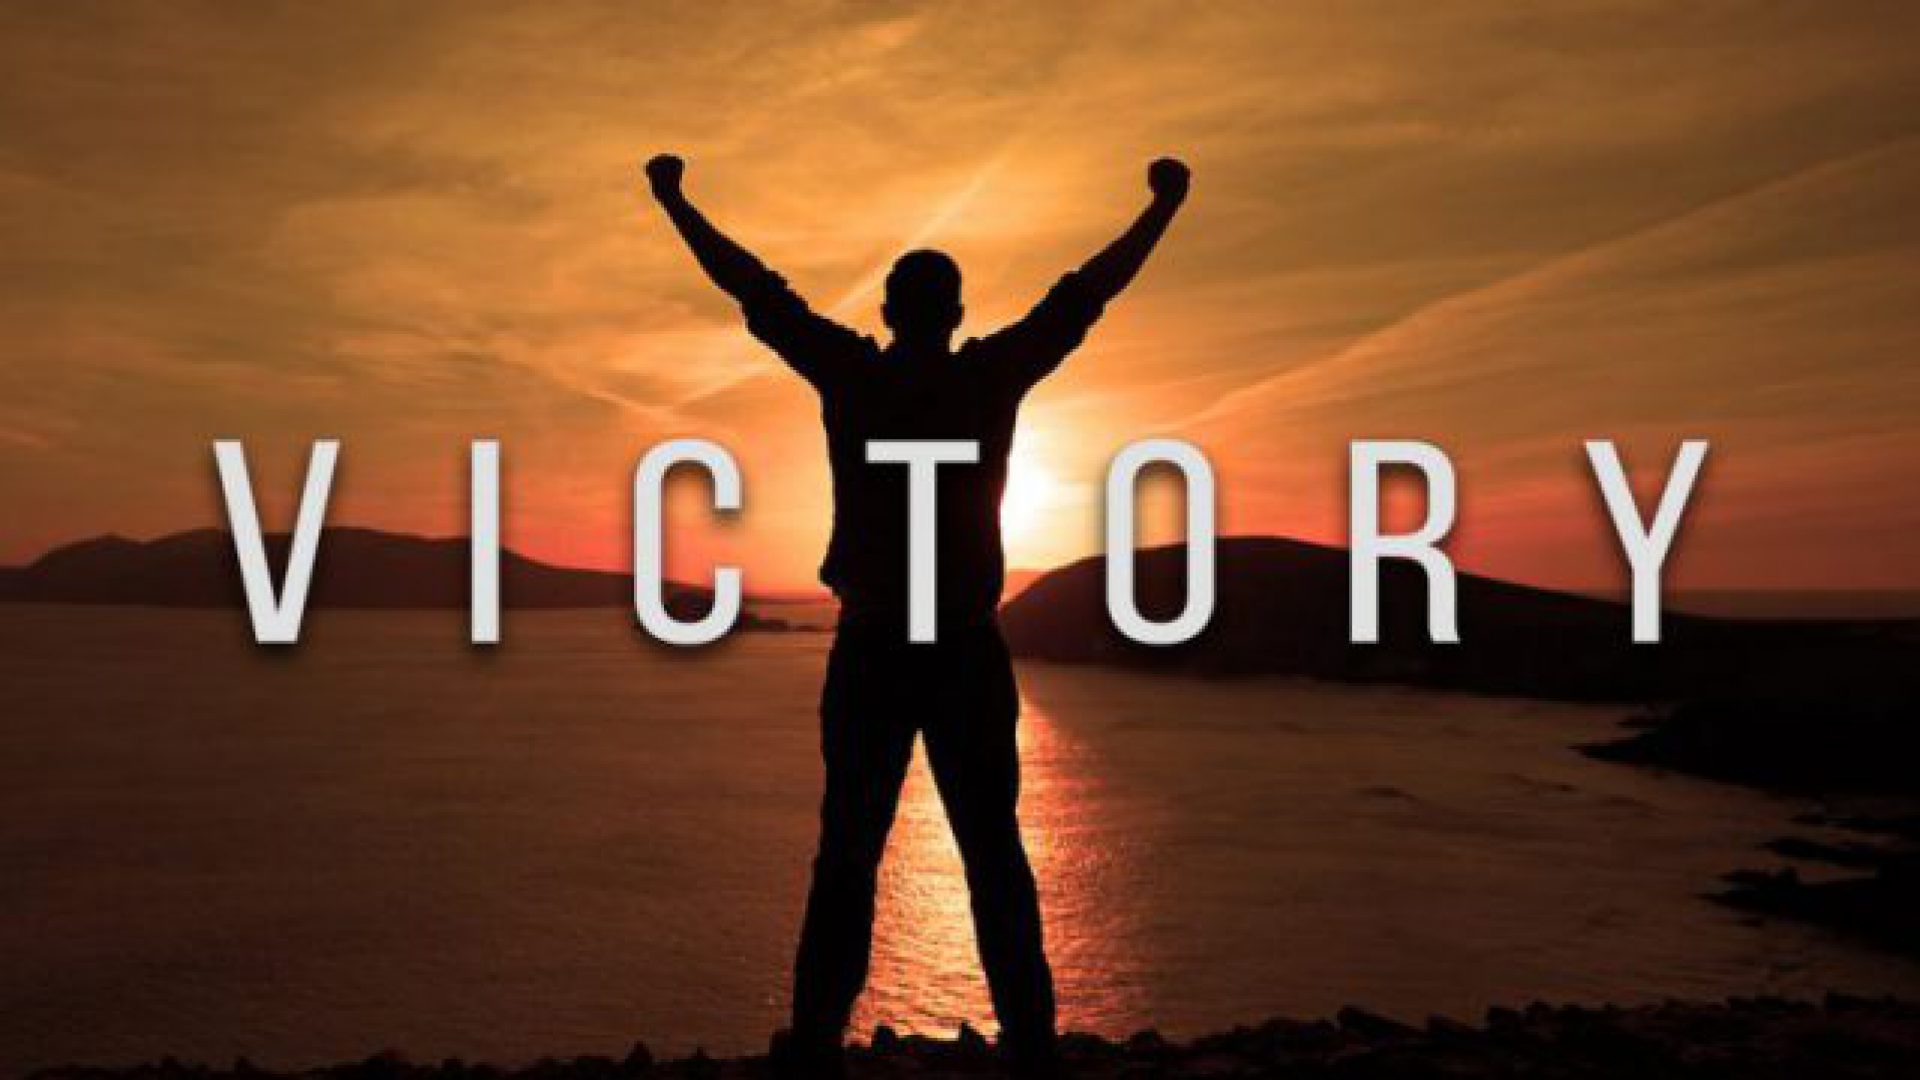 SEVEN STEPS TO VICTORY